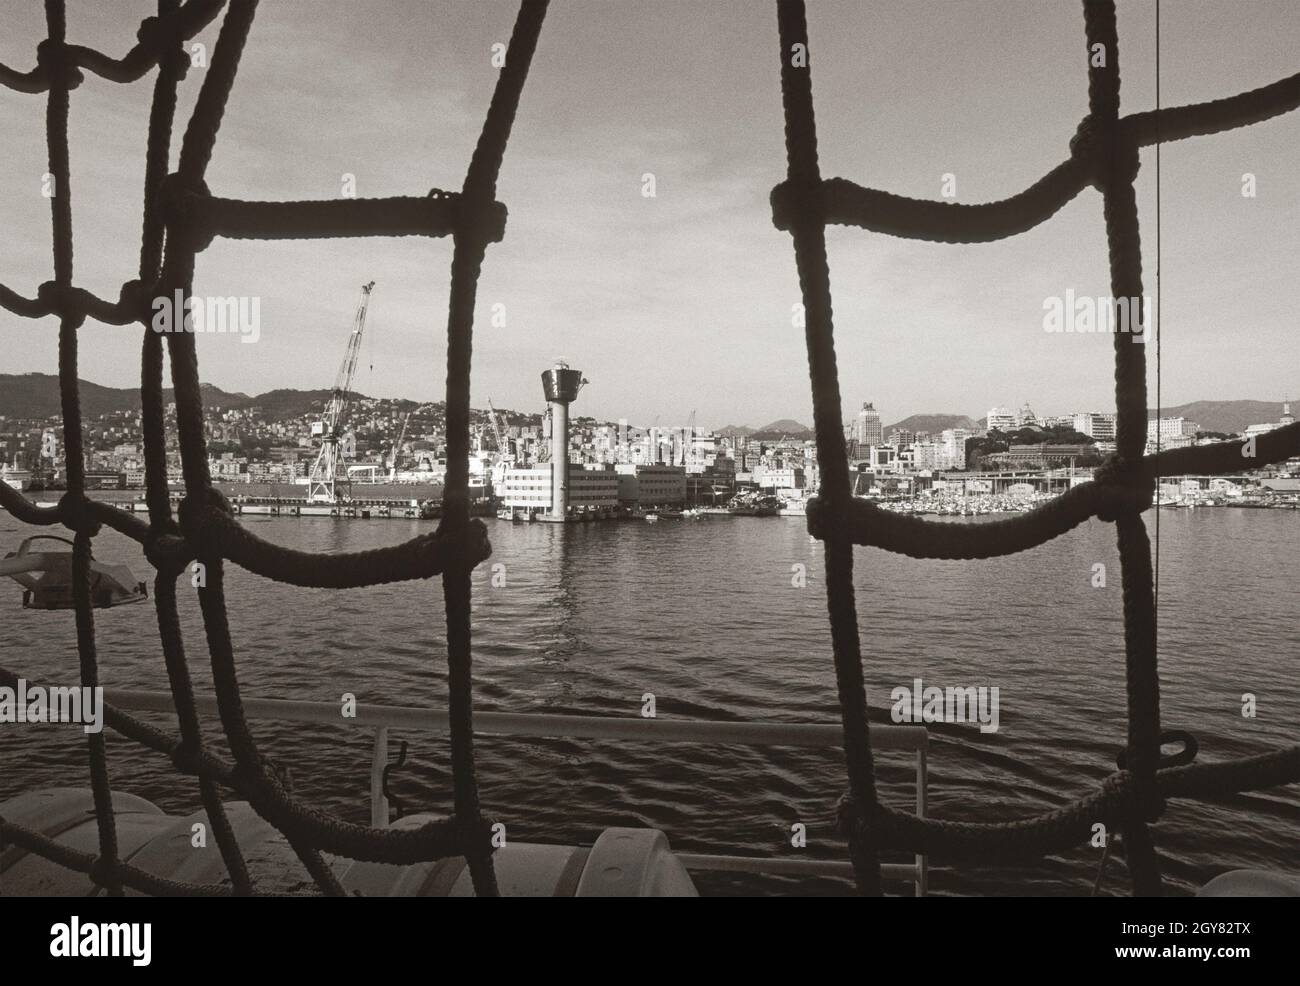 a view of Genoa harbour from a ship and rigging, Italy Stock Photo